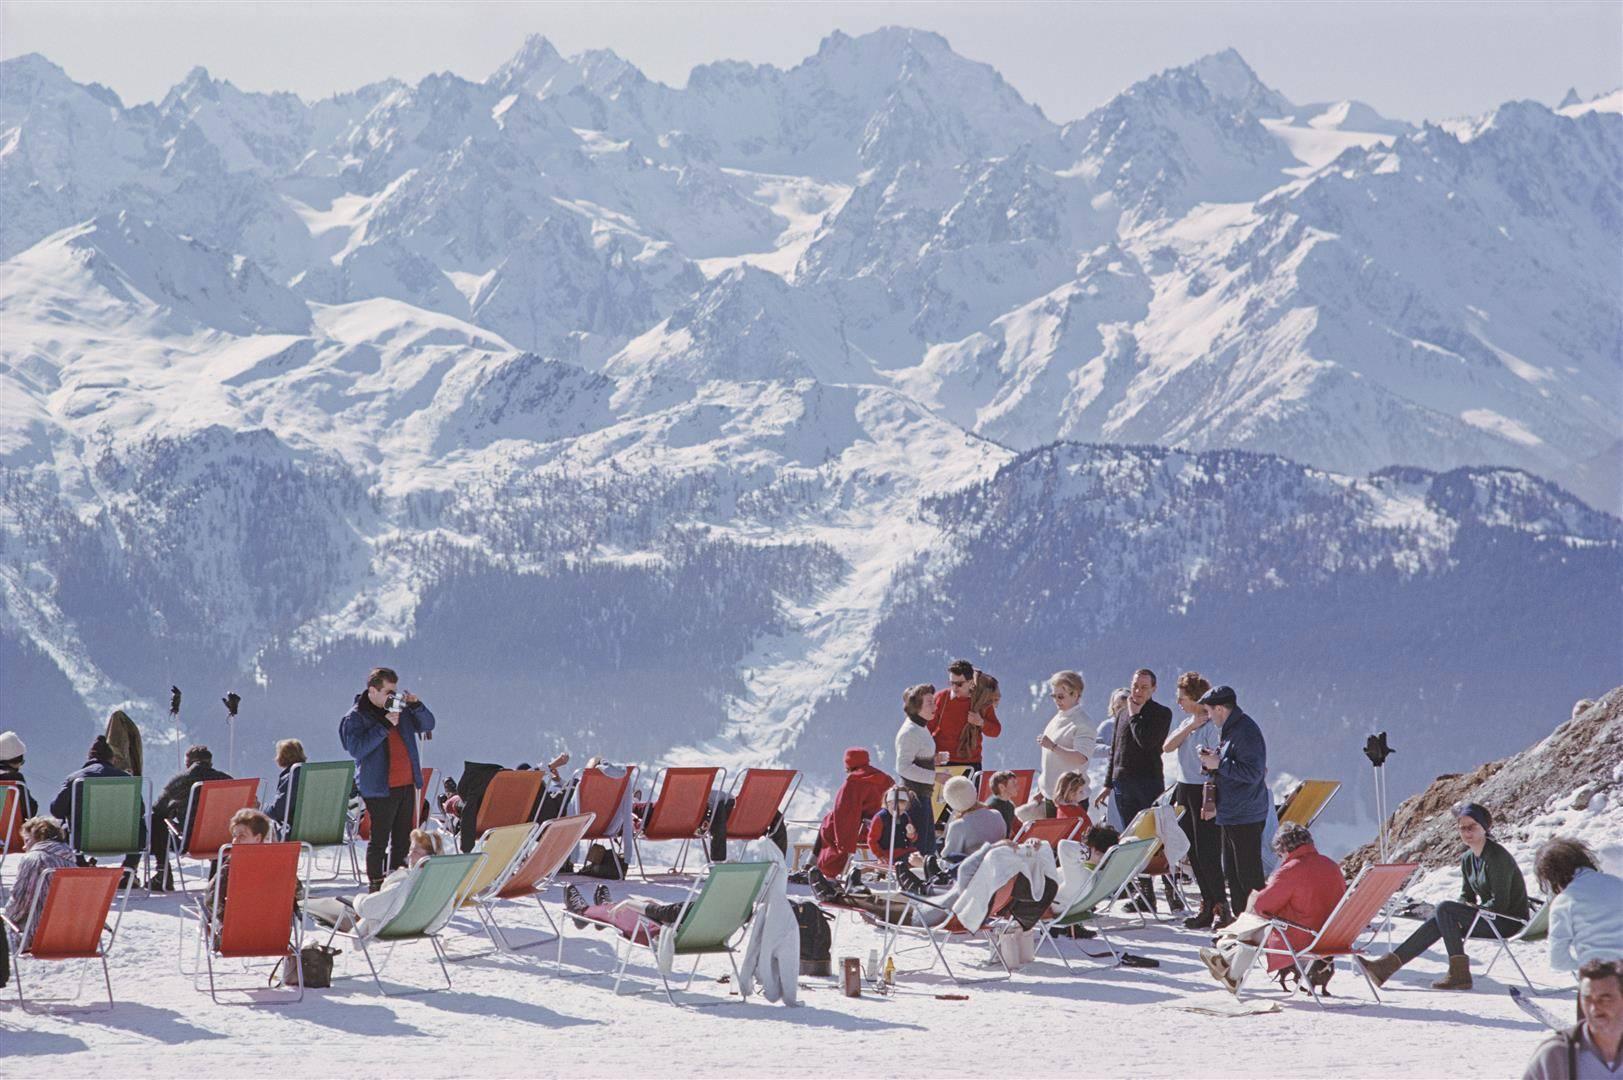 Slim Aarons Landscape Photograph - 'Lounging In Verbier' (Estate Stamped Edition)